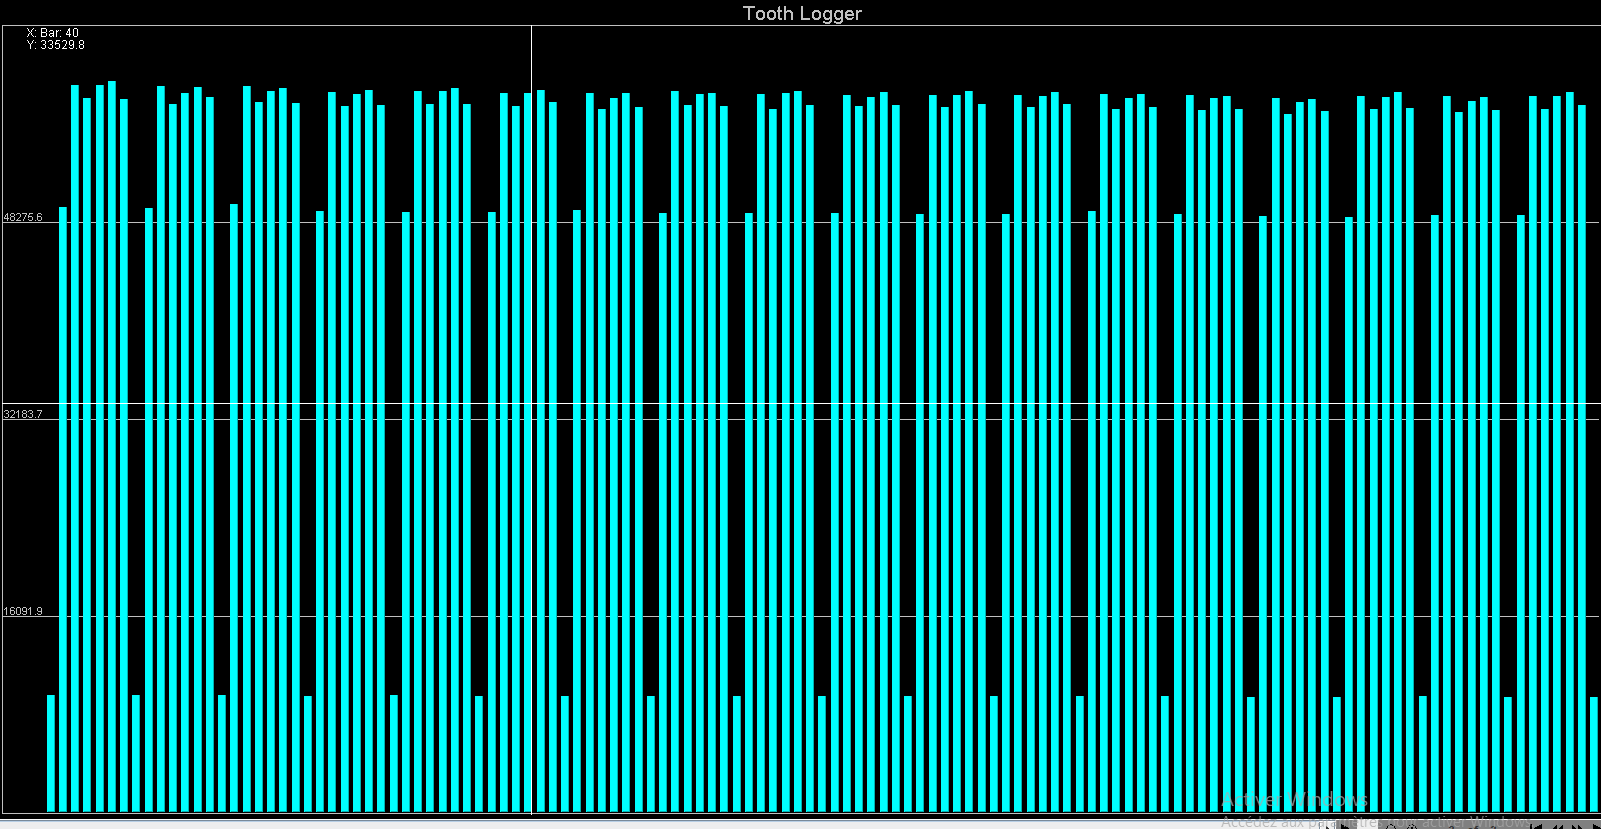 cranking with all sensors without filter and with falling edge.PNG